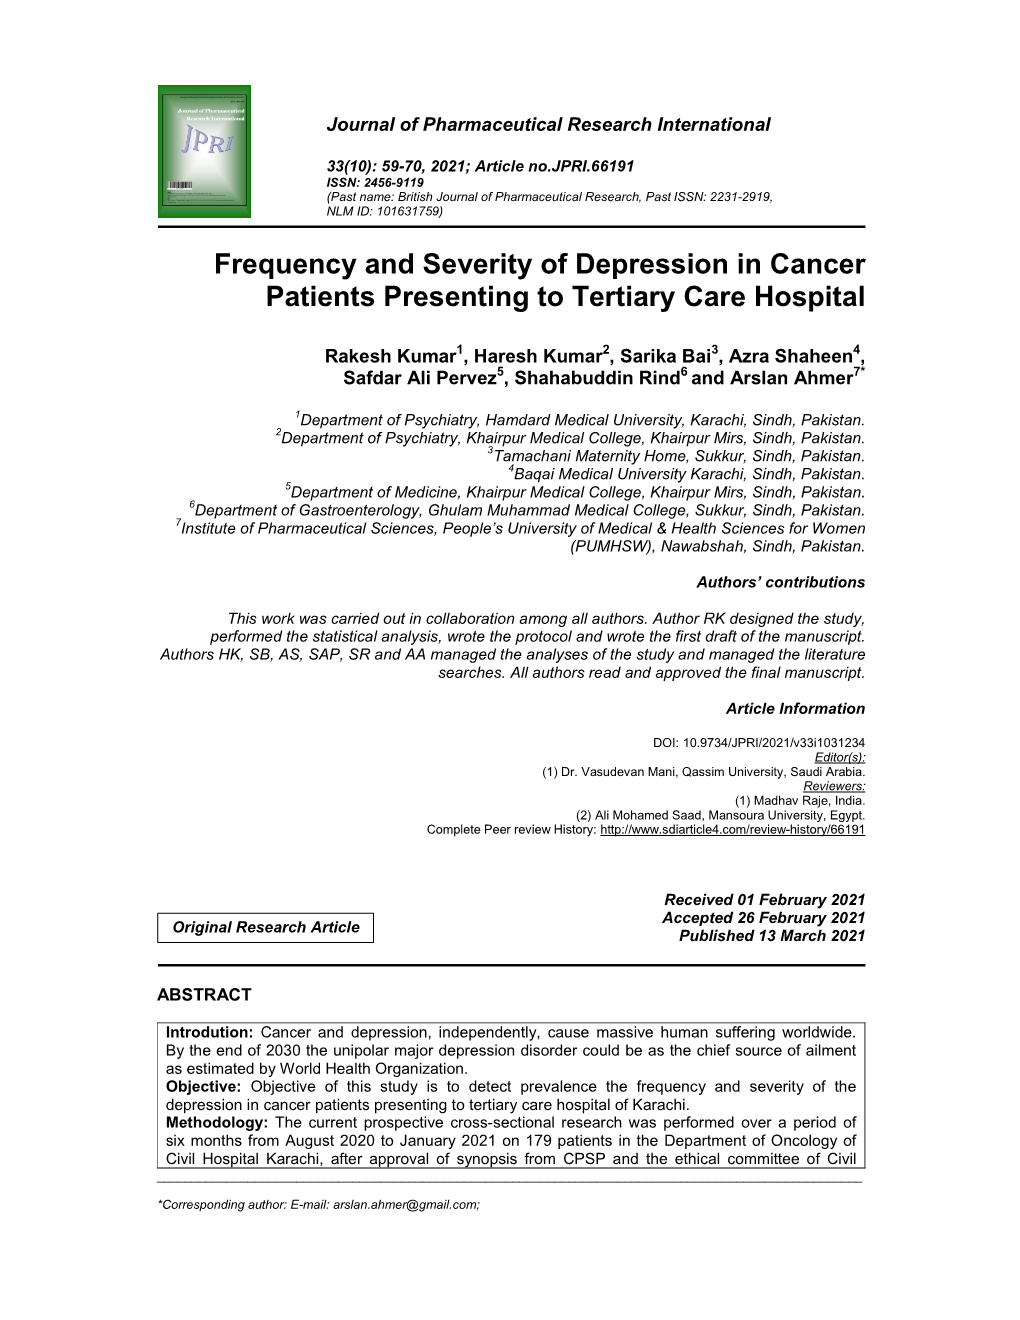 Frequency and Severity of Depression in Cancer Patients Presenting to Tertiary Care Hospital